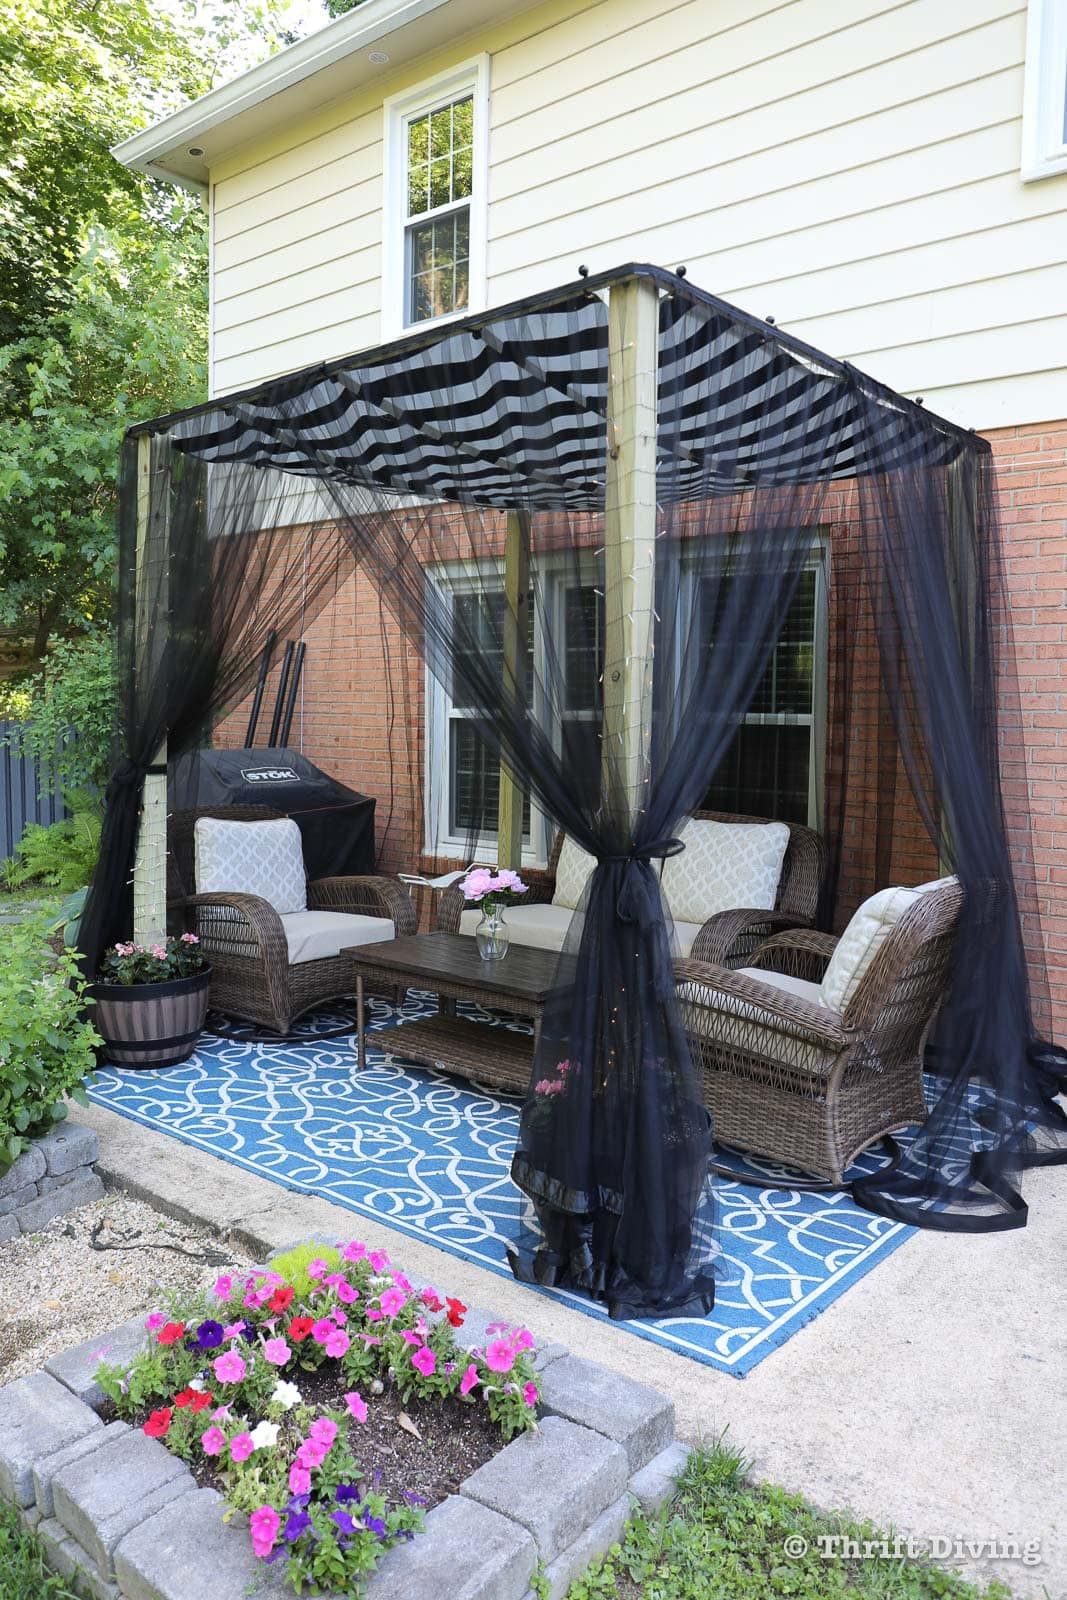 20 Best Patio Cover Ideas - Covered Patio Designs